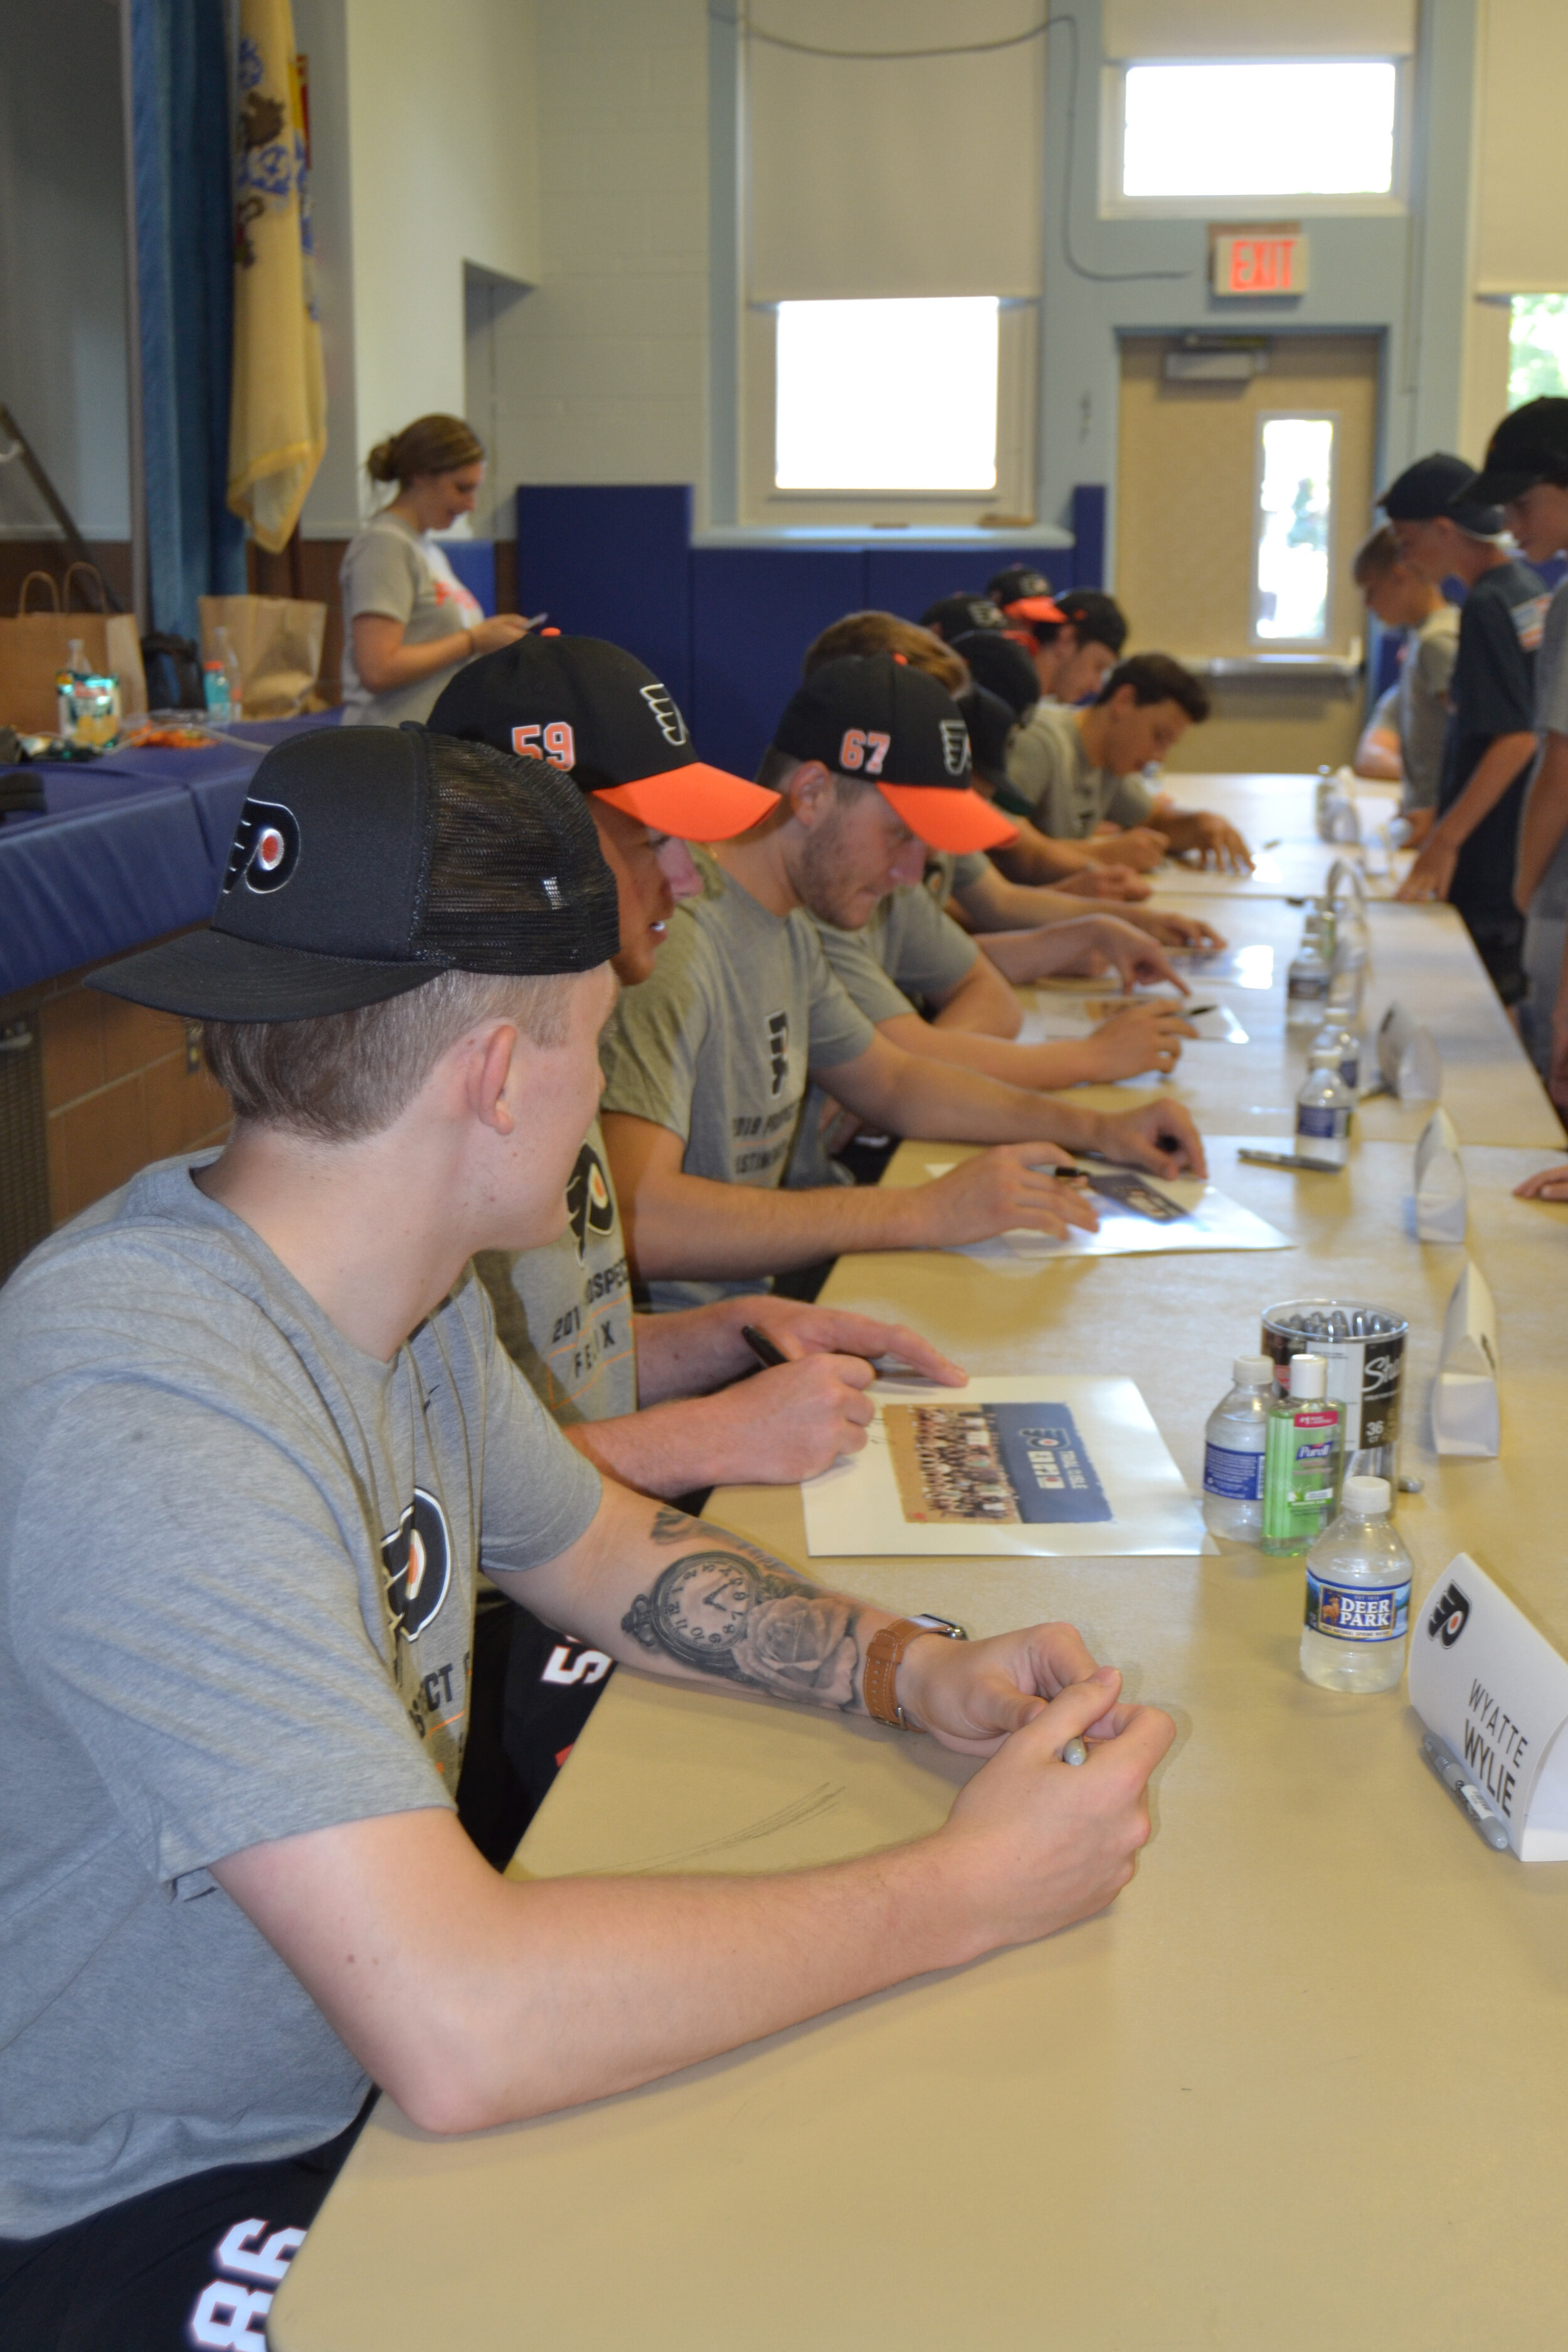 Prospects’ signed autographs during a special signing at the Stone Harbor Elementary School.